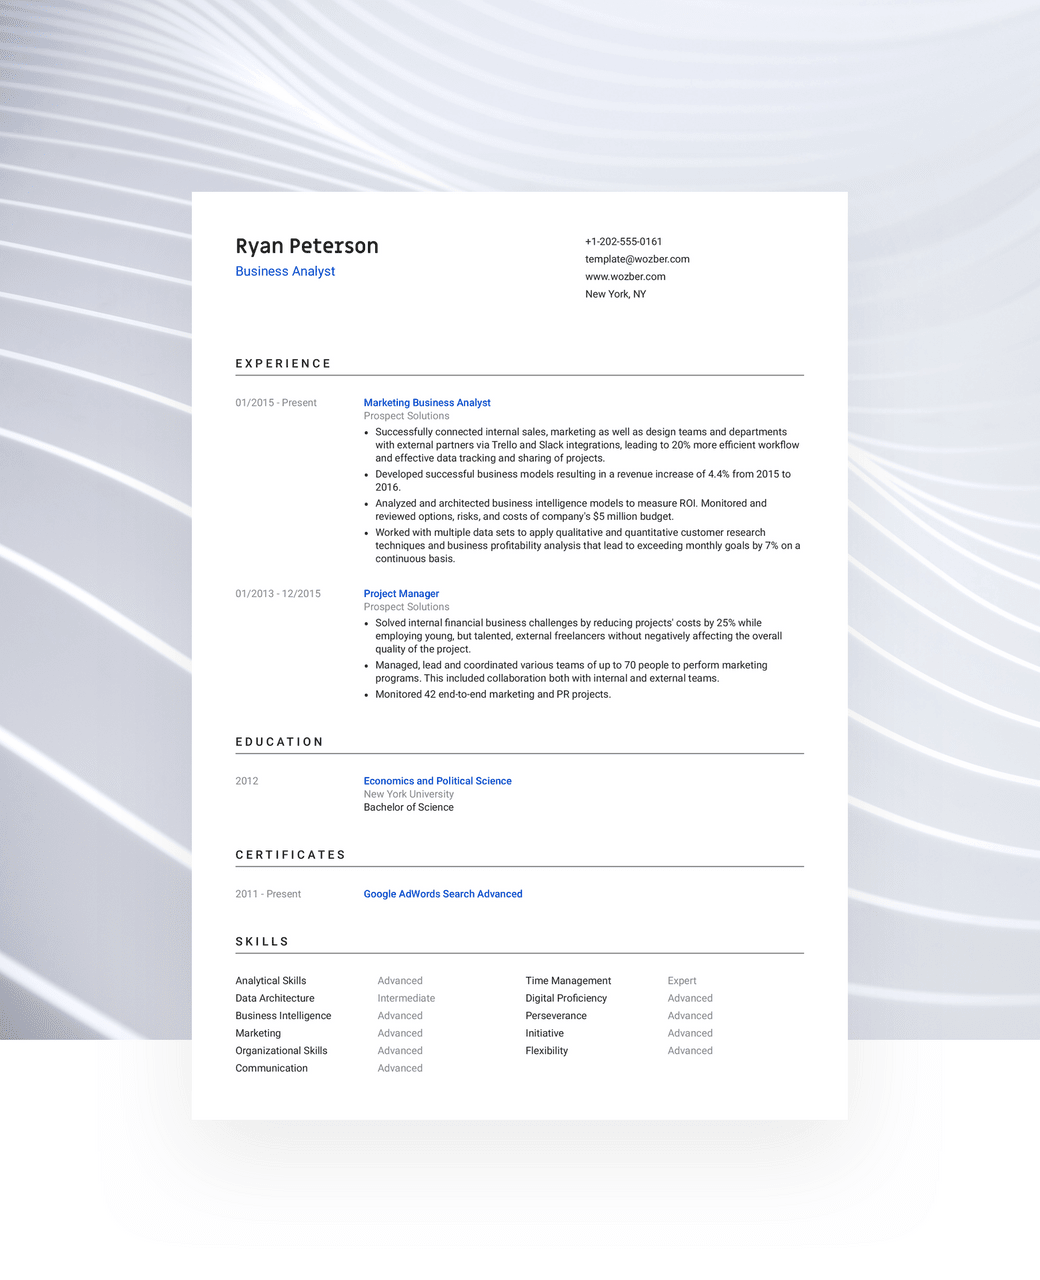 A classic format resume template optimized for applicant tracking systems.